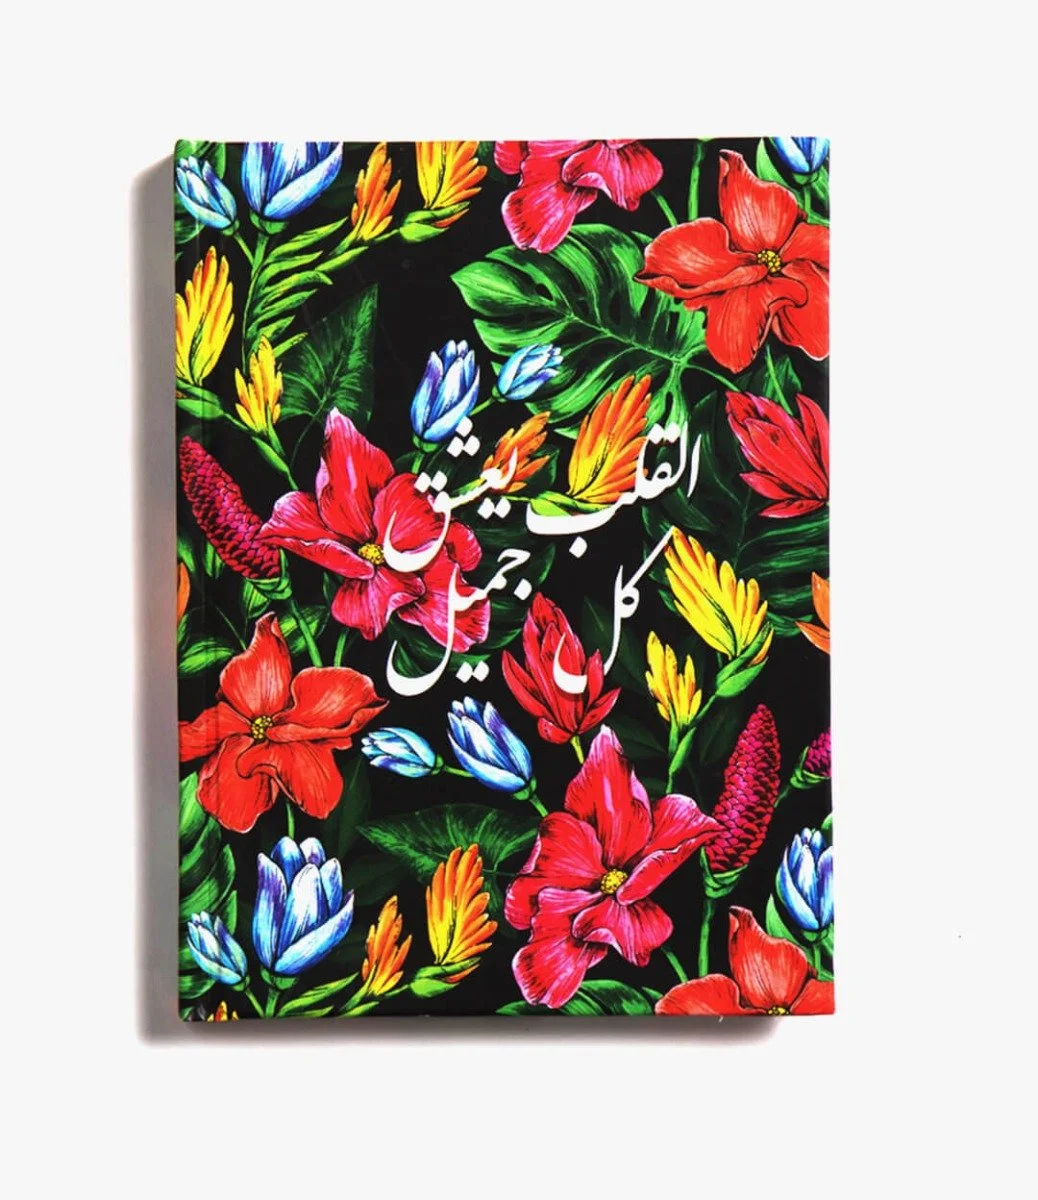 Floral Arabic 1 Notebook Hardcover A6 Size